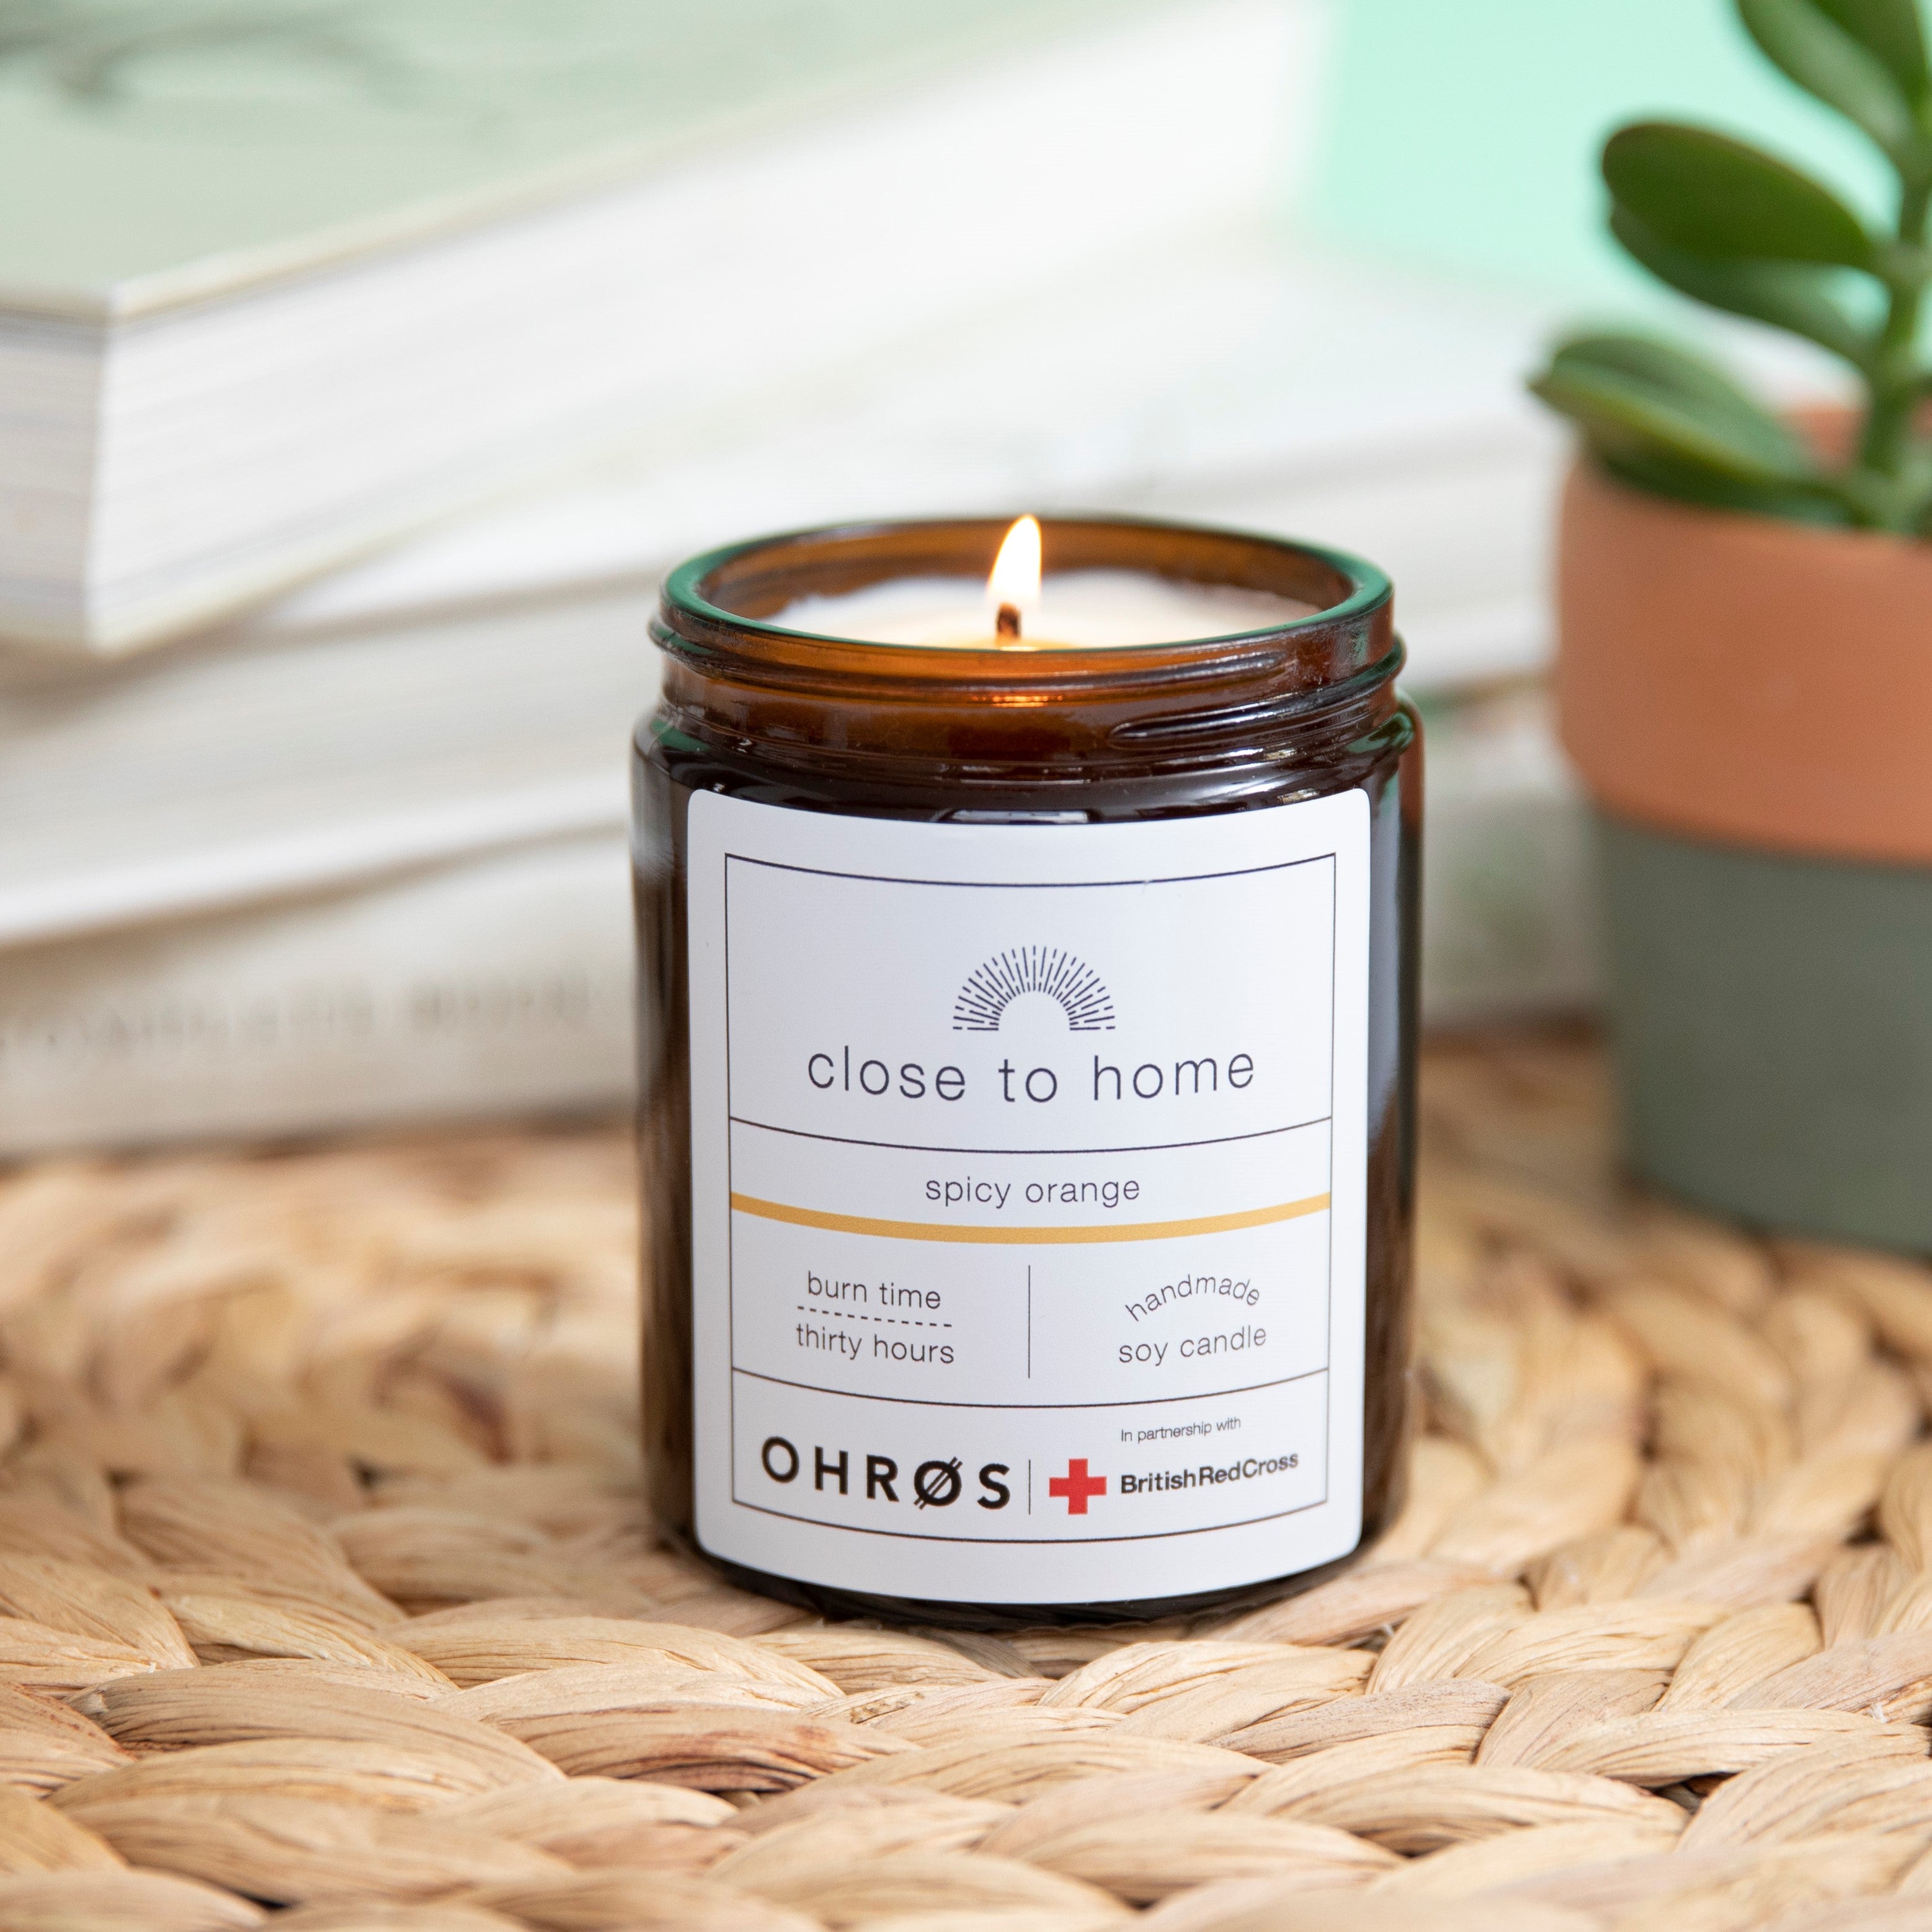 Designed by Refugees Spicy Orange Soy Wax Scented Candle